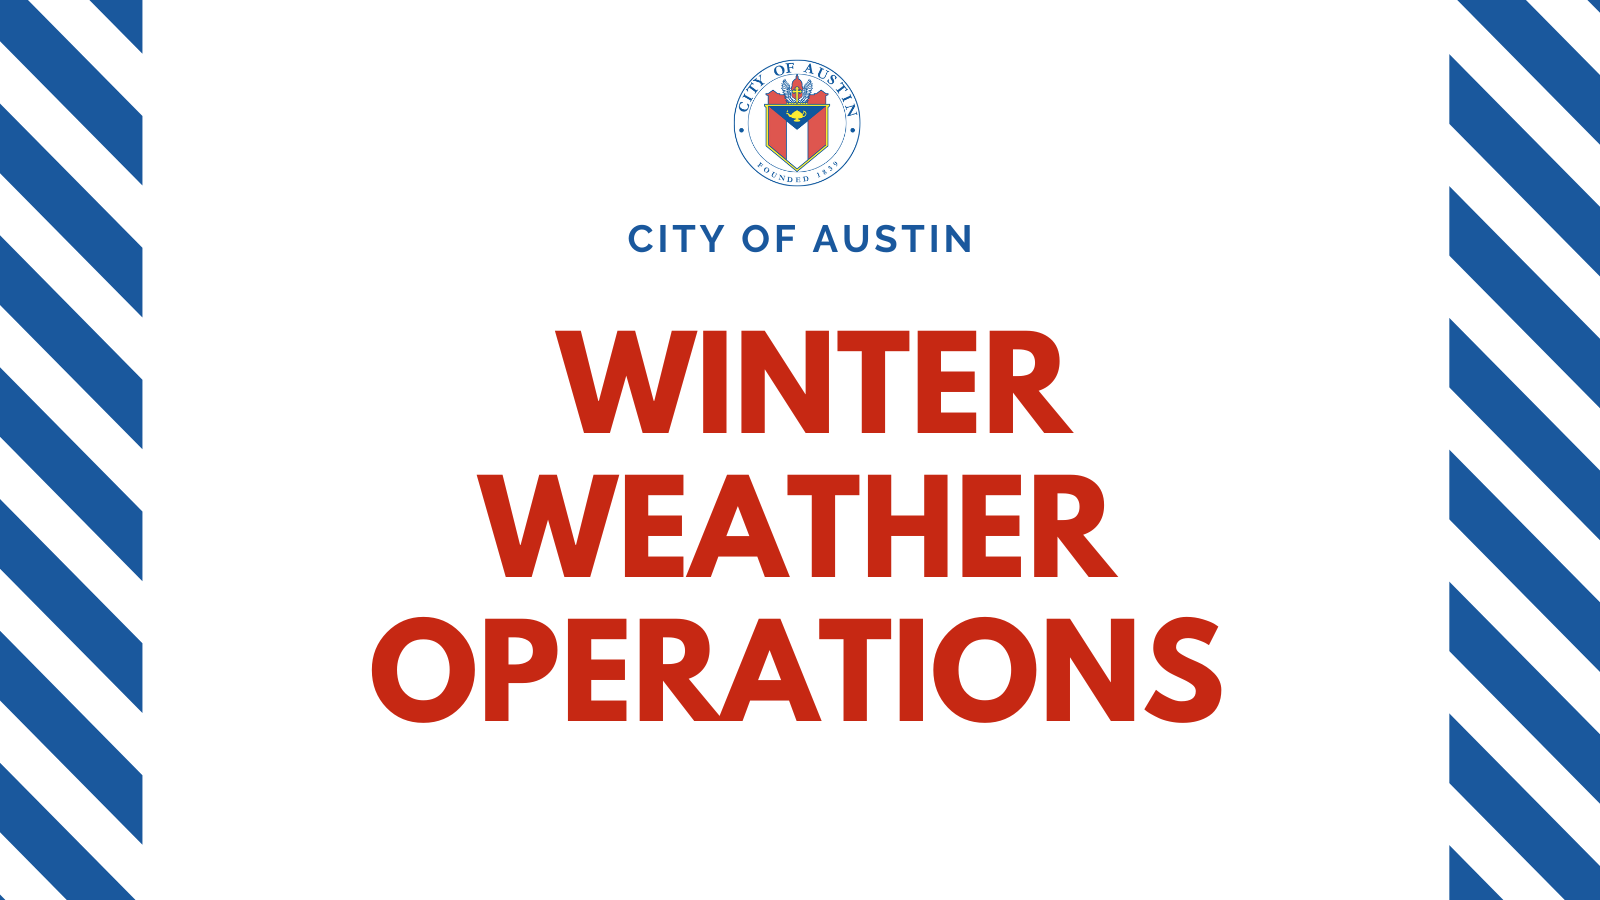 City of Austin logo with Winter weather wording in red